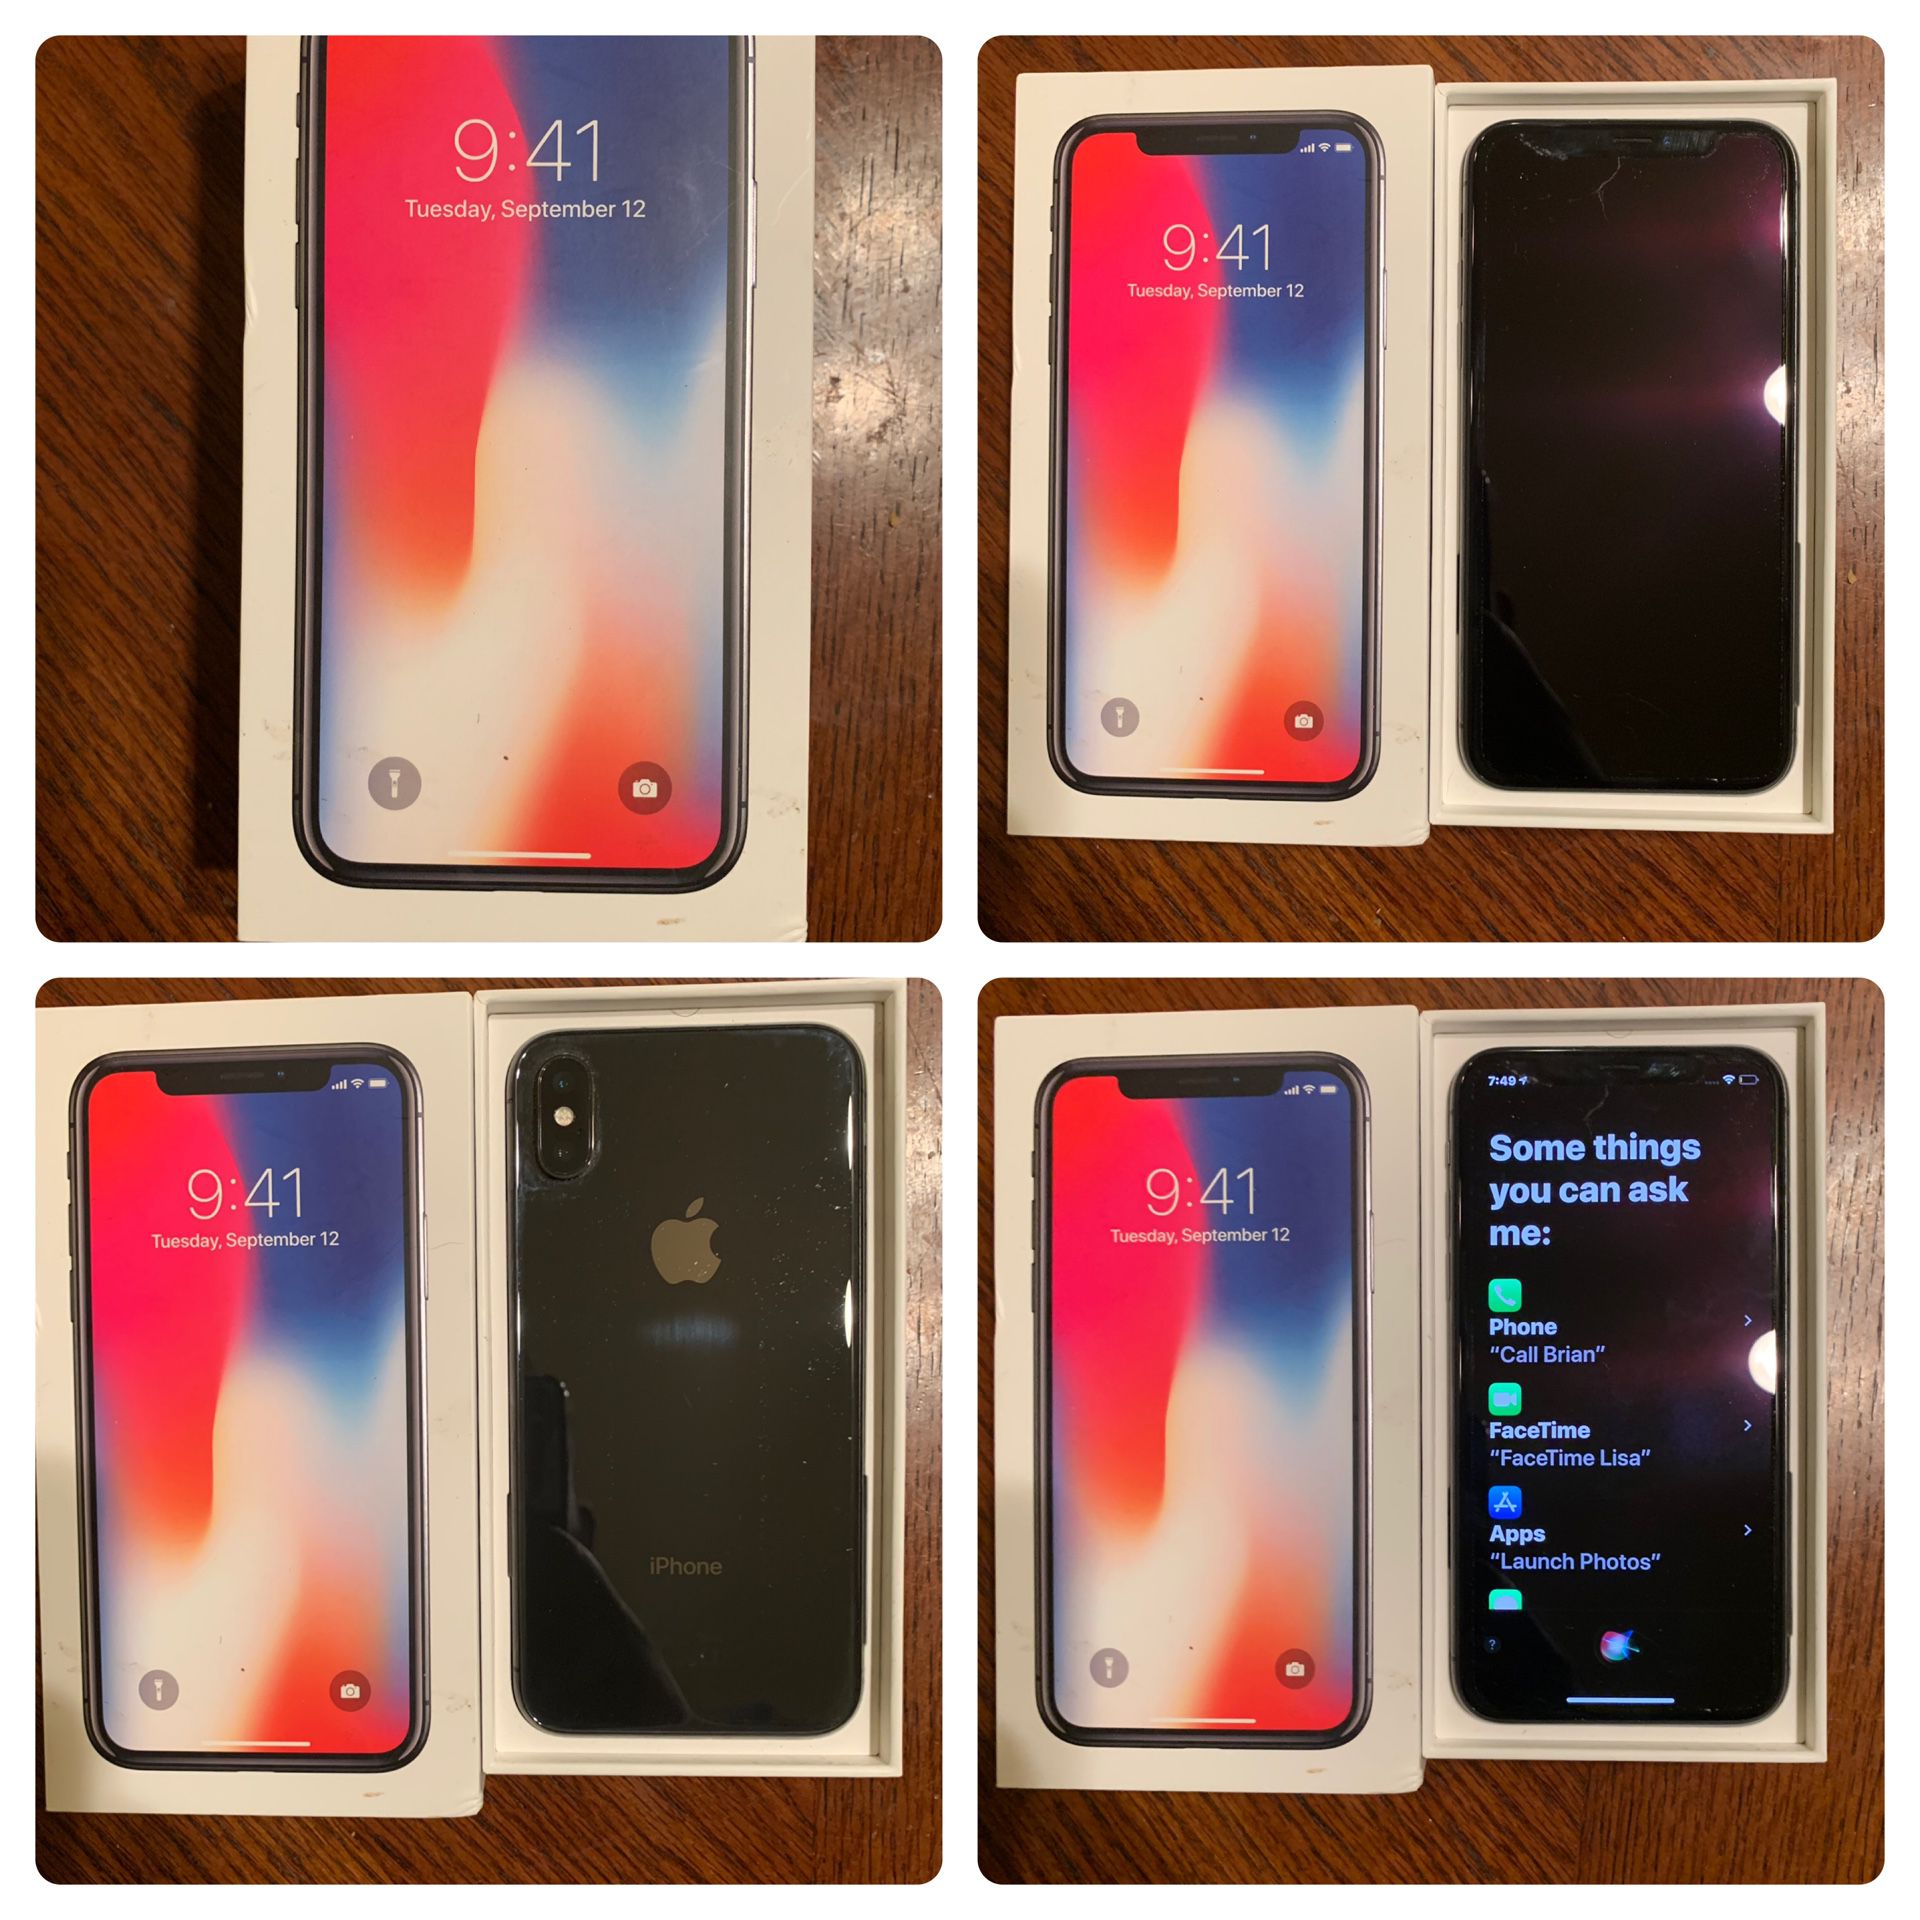 iPhone X 256 GB unlocked 400 phone just multiple pictures